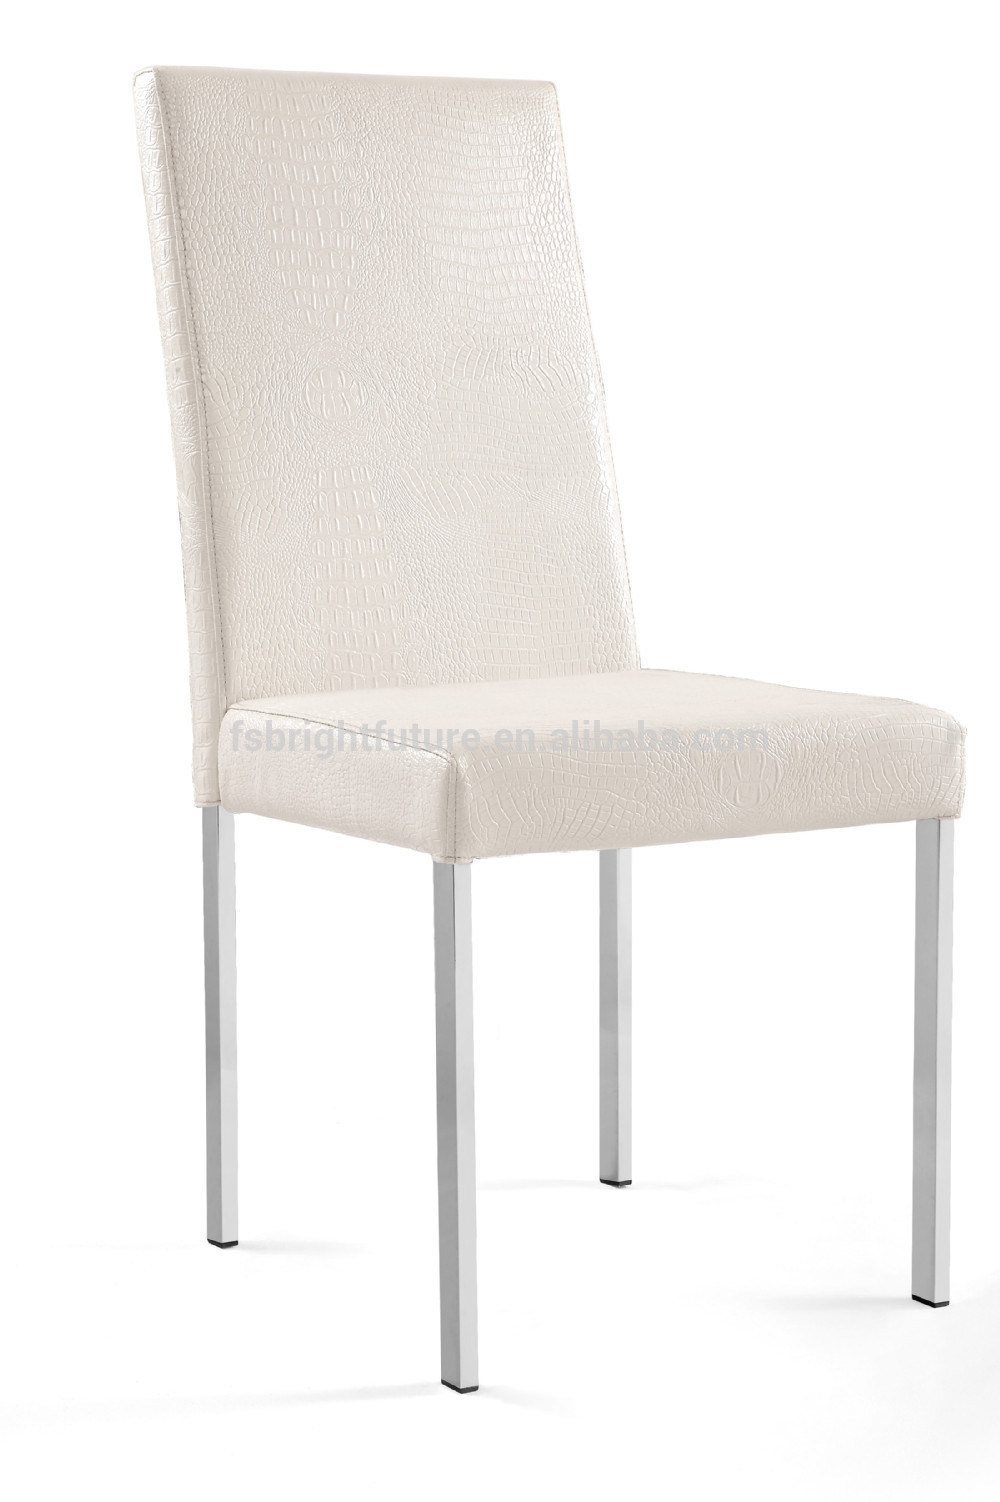 White PU Stainless Steel Metal Dining Chair